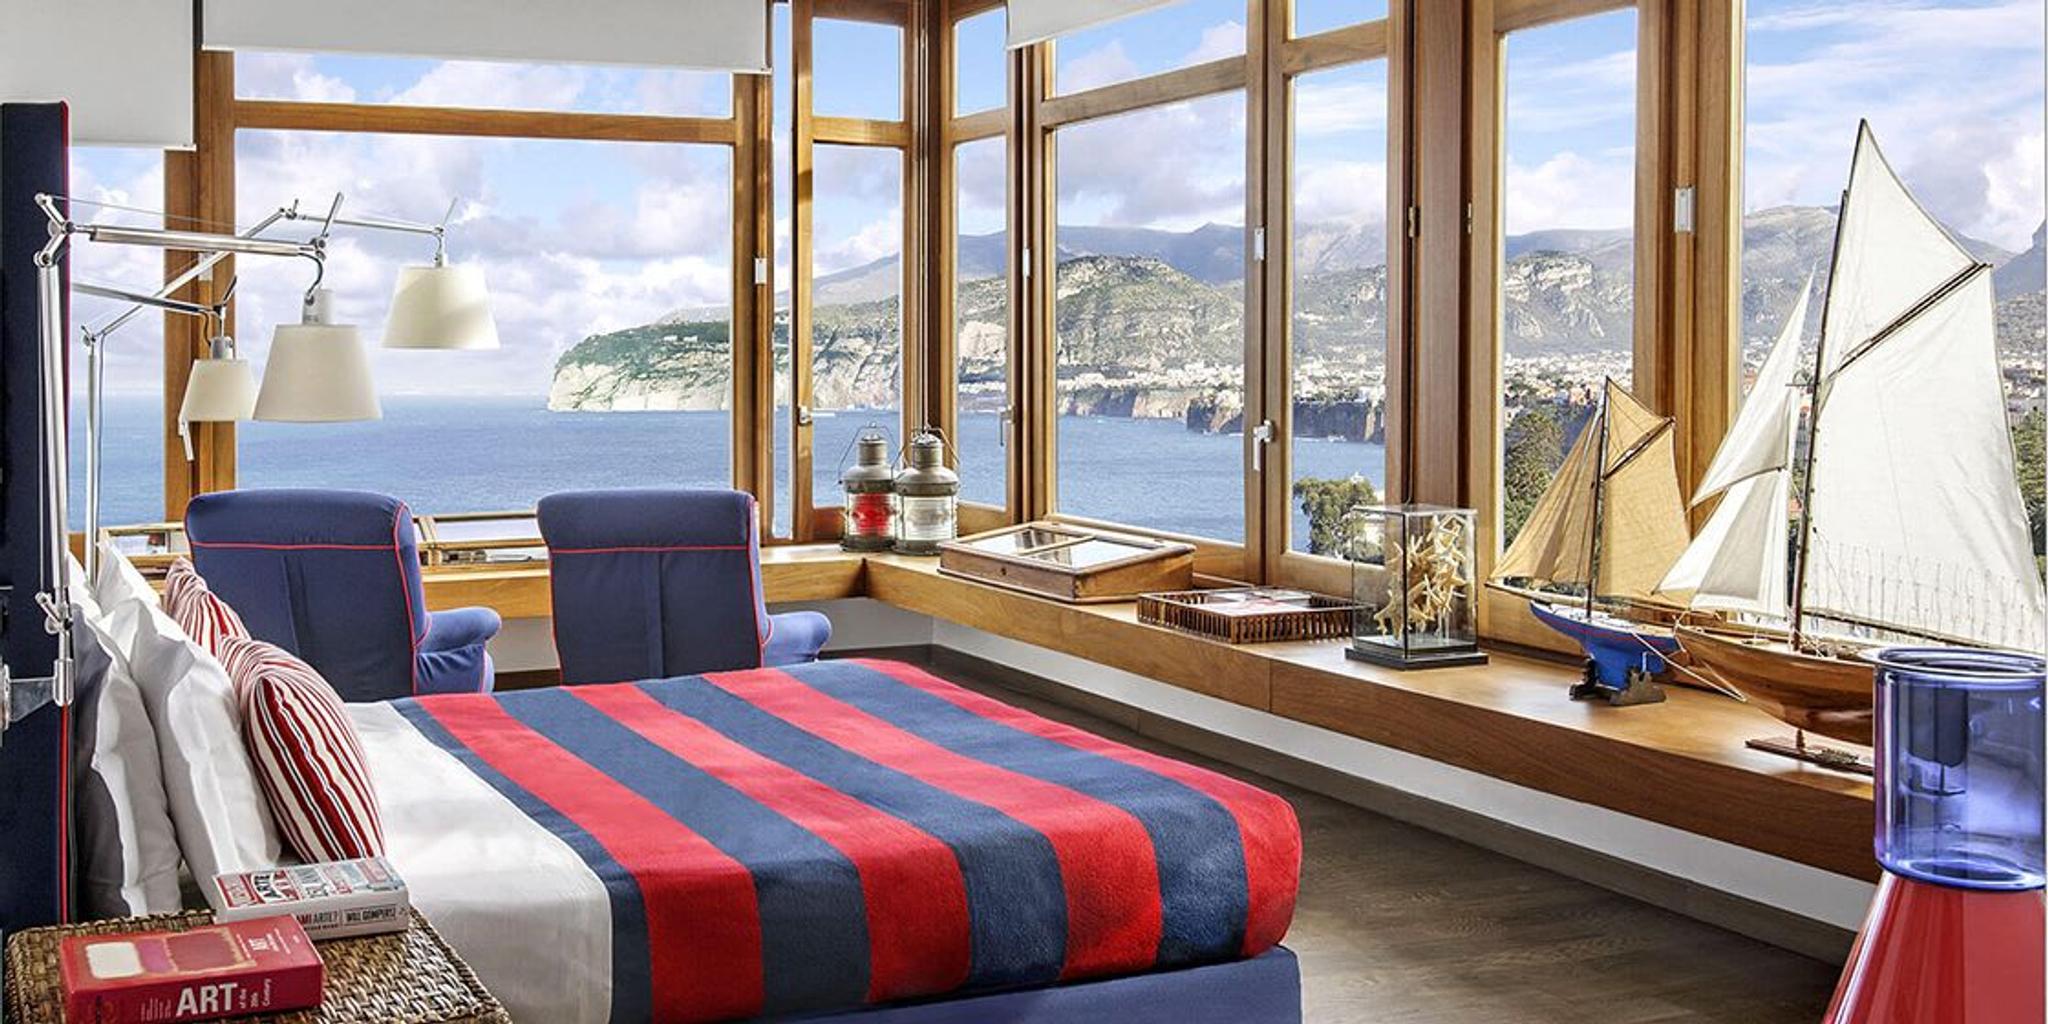 Breath taking views and décor in one of the bedrooms of the charming La Minervetta Hotel in Sorrento